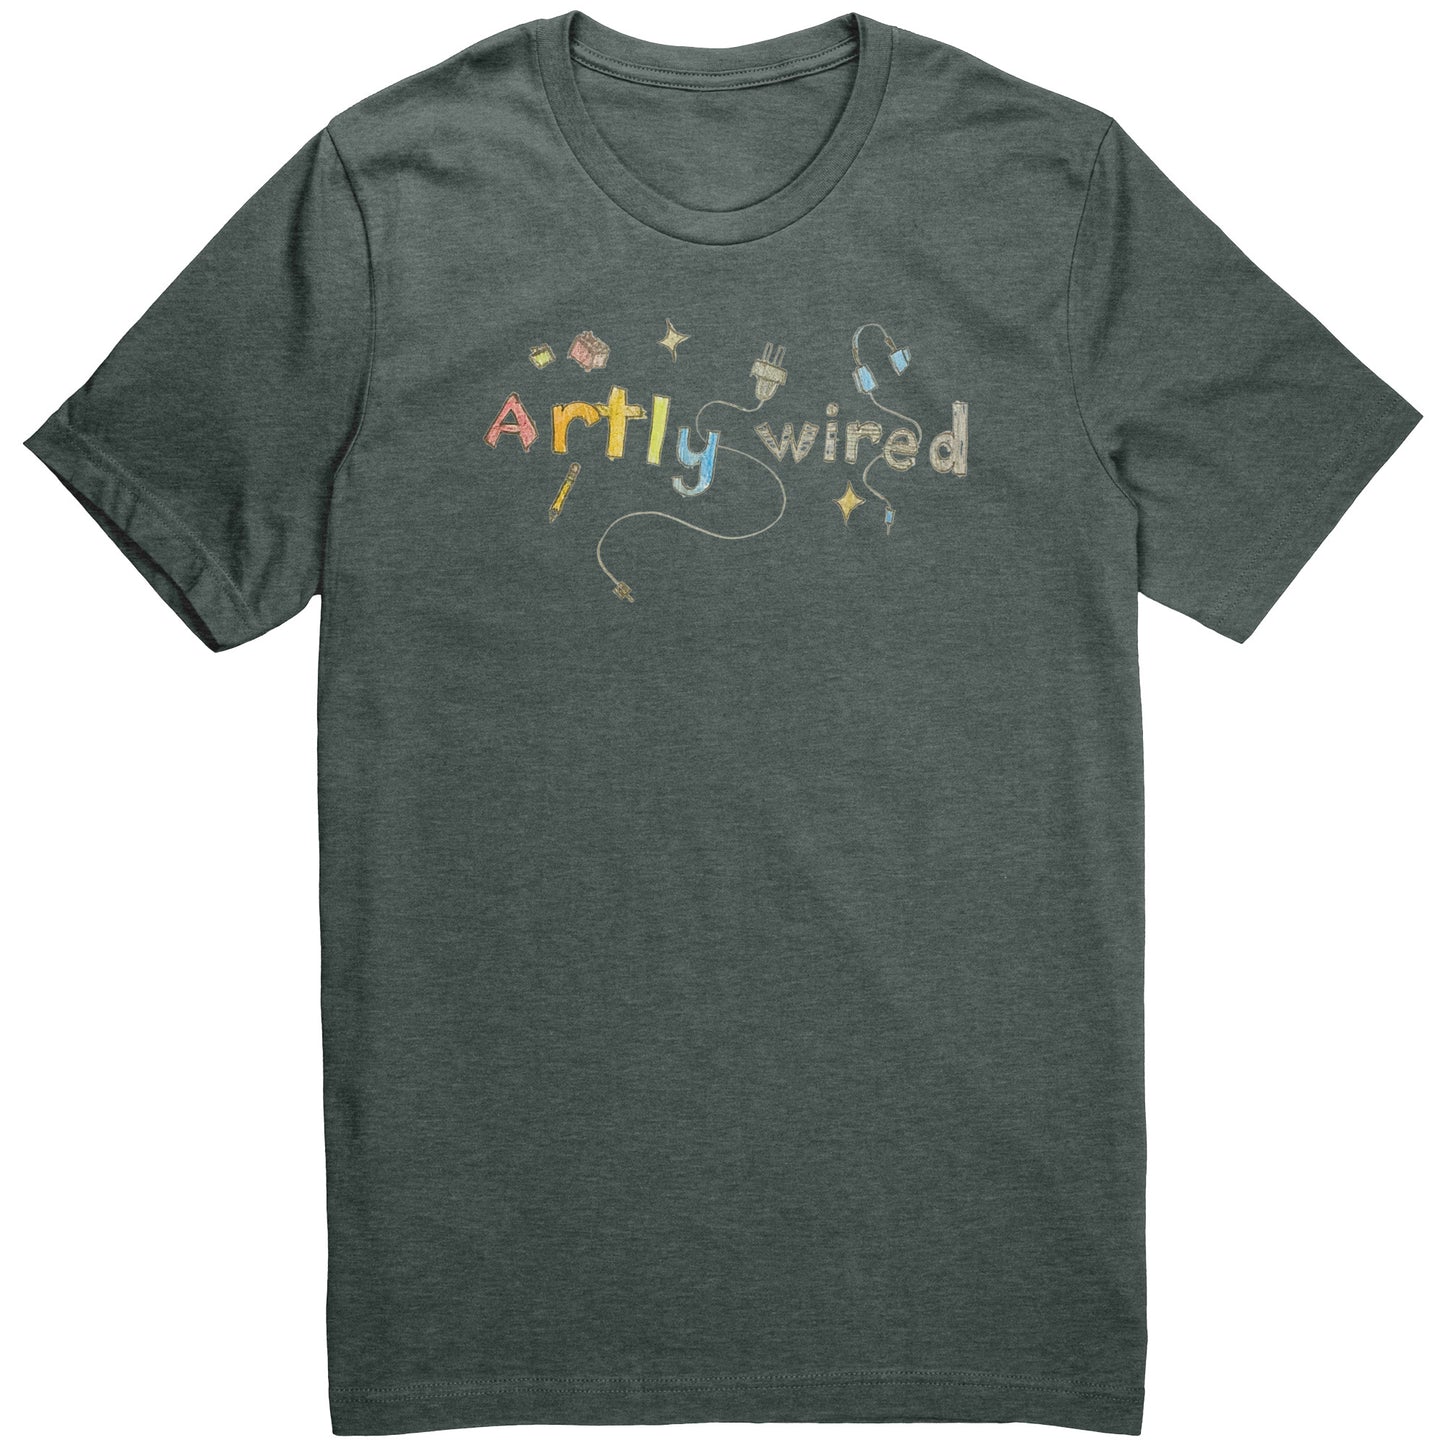 Artly Wired Unisex Adult T-Shirt